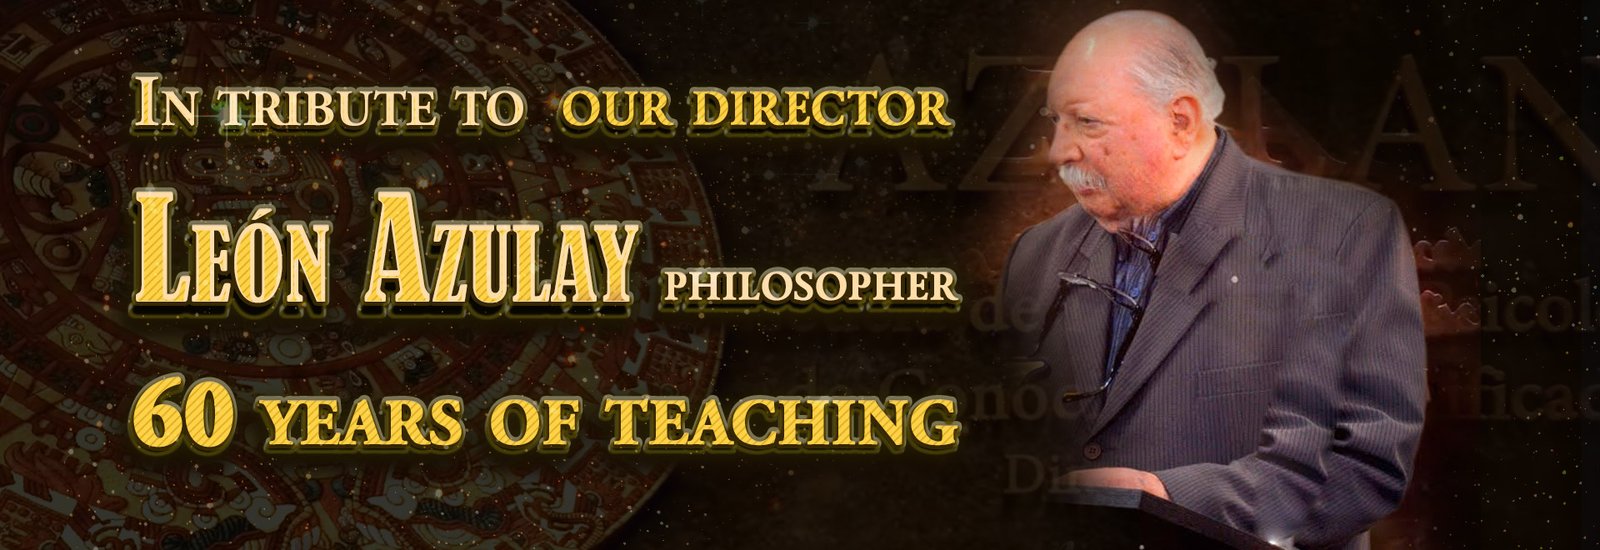 In honor of our Director León Azulay, Philosopher, 60 Years of Teaching